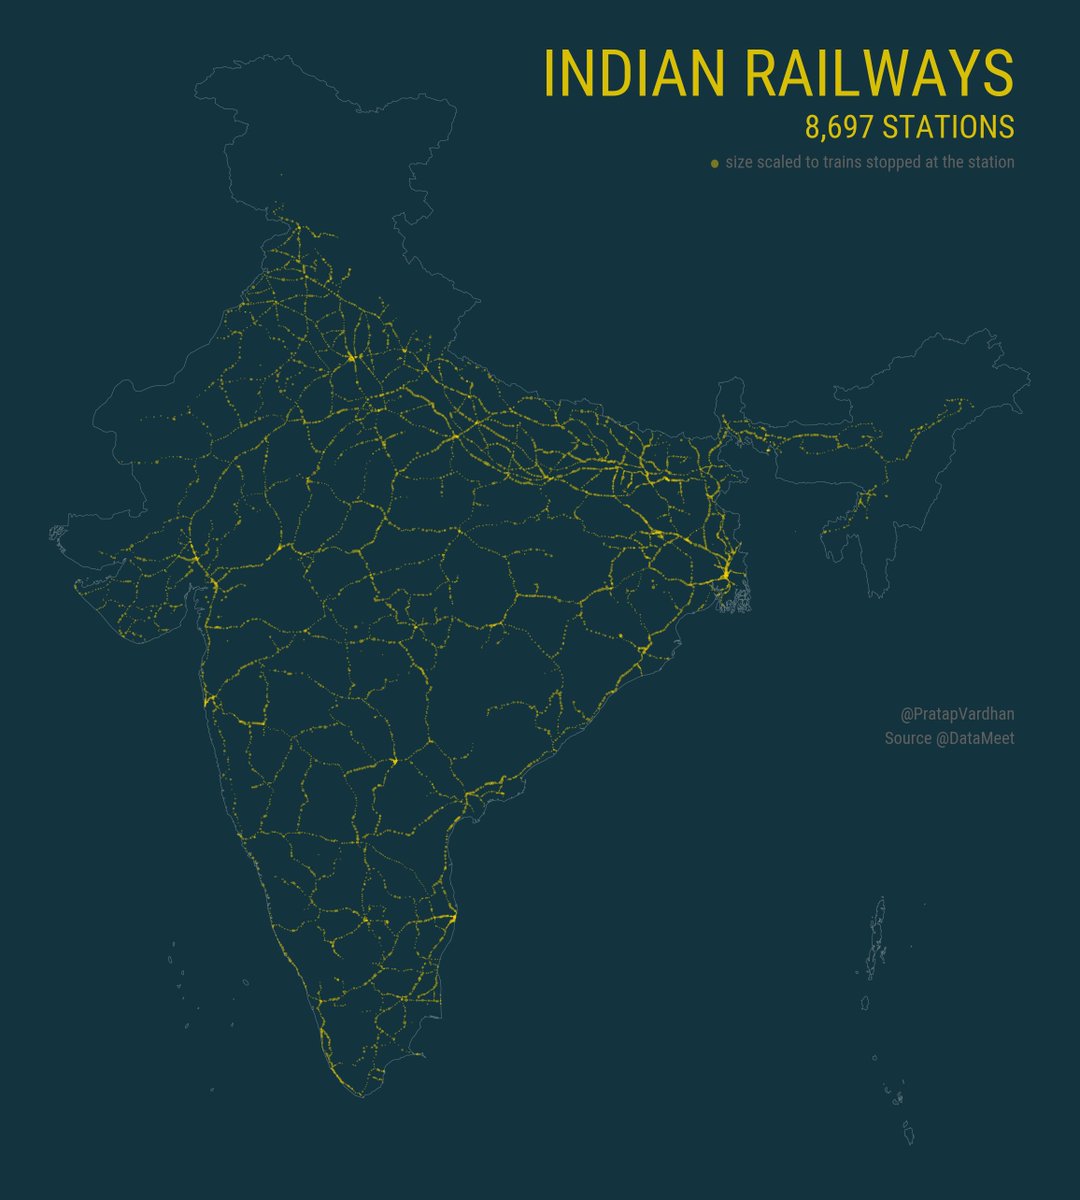 Kicking off the  #30DayMapChallenge by visualizing the network formed by 8,697  railway stations in India.Day 1: PointsLooking forward to explore  India through geospatial visualizations with this challenge. Made with  @geopandas  @matplotlib